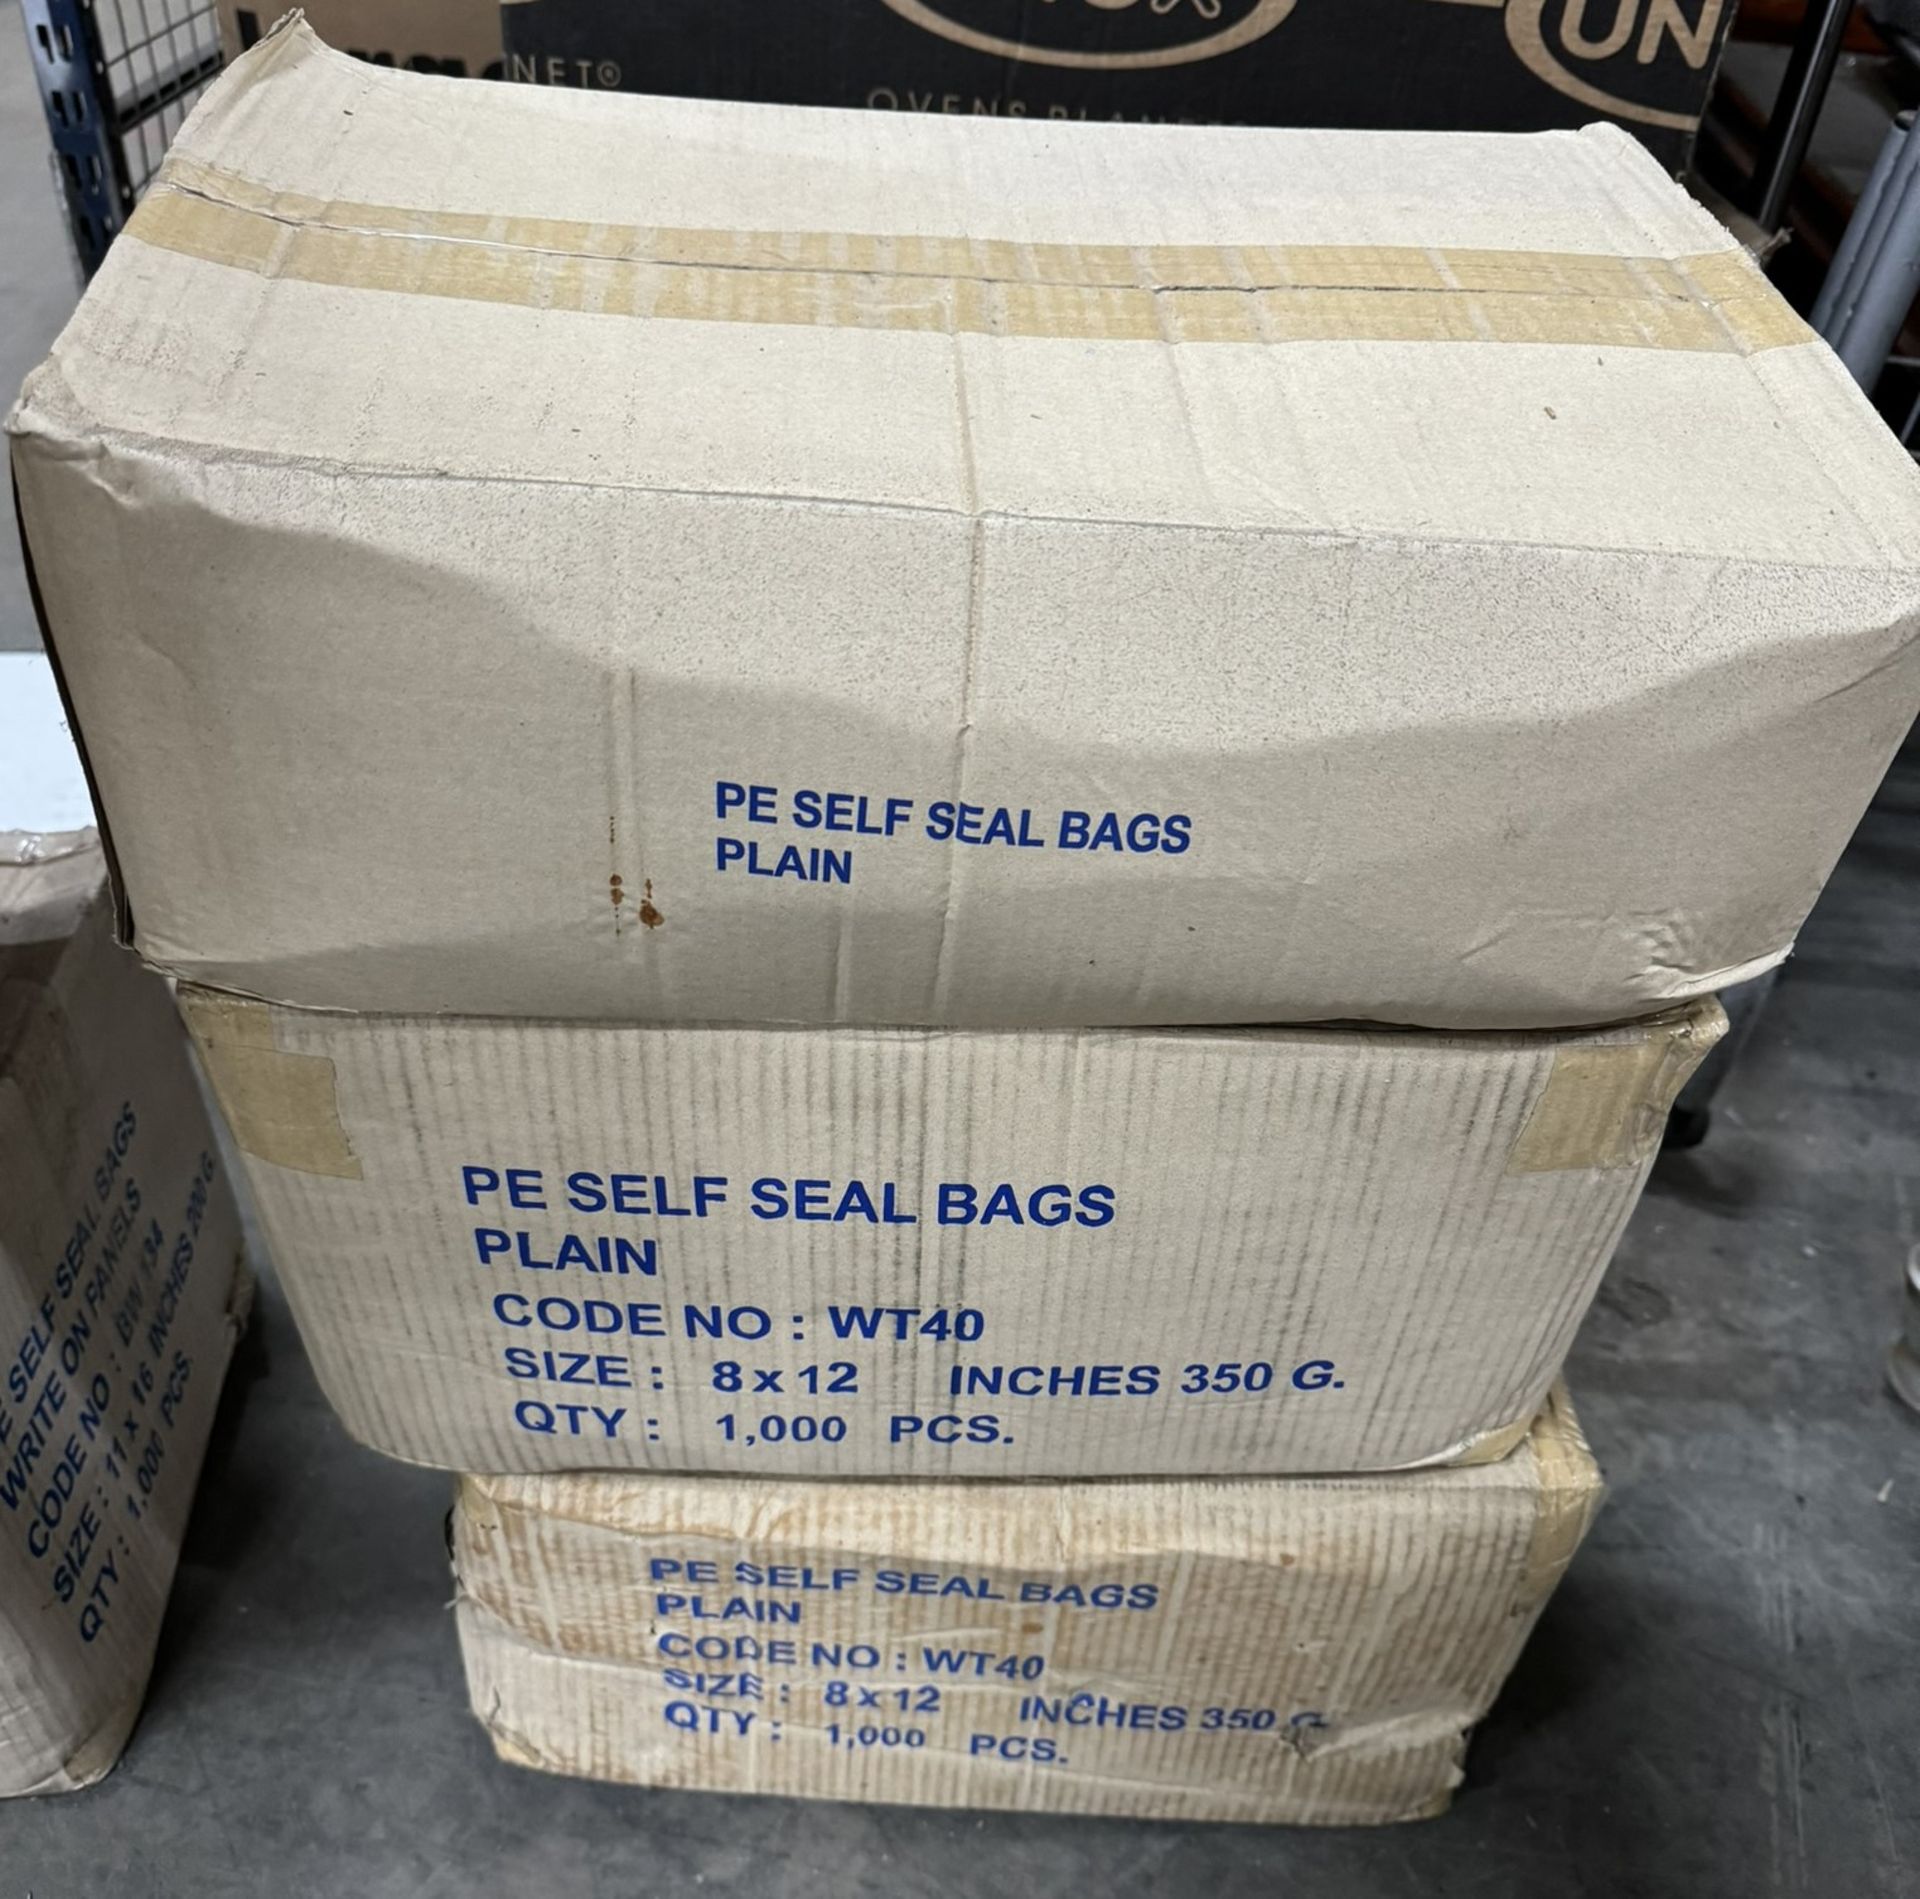 3 x Boxes Of Unbranded Plain Self Seal Bags - As Pictured